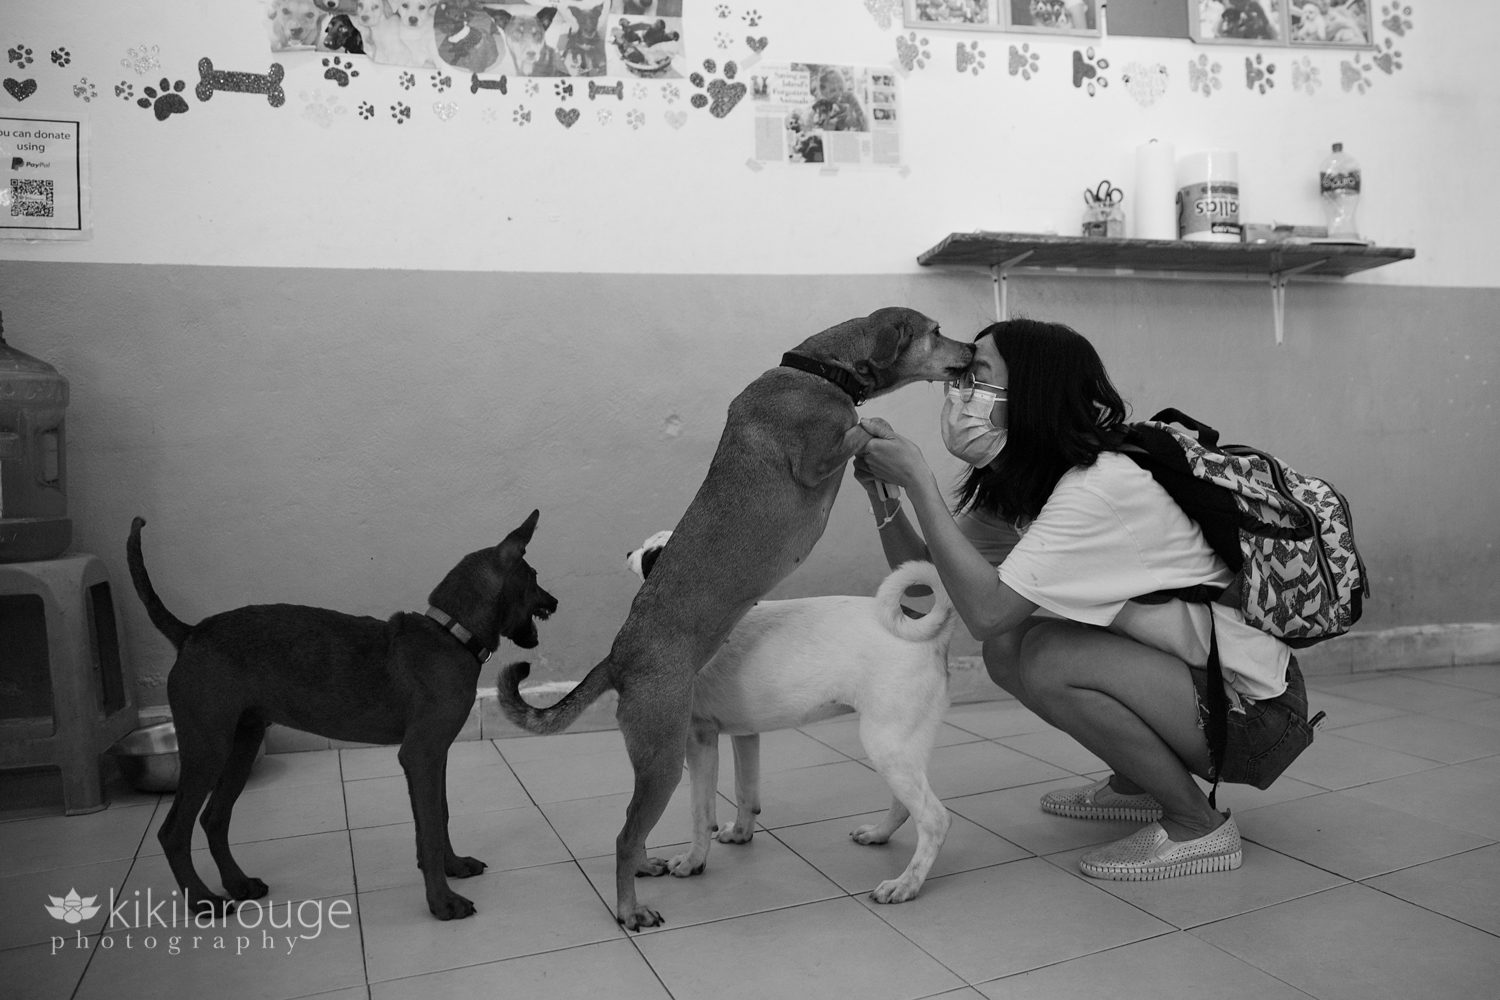 Woman with mask on at animal shelter playing with the puppies